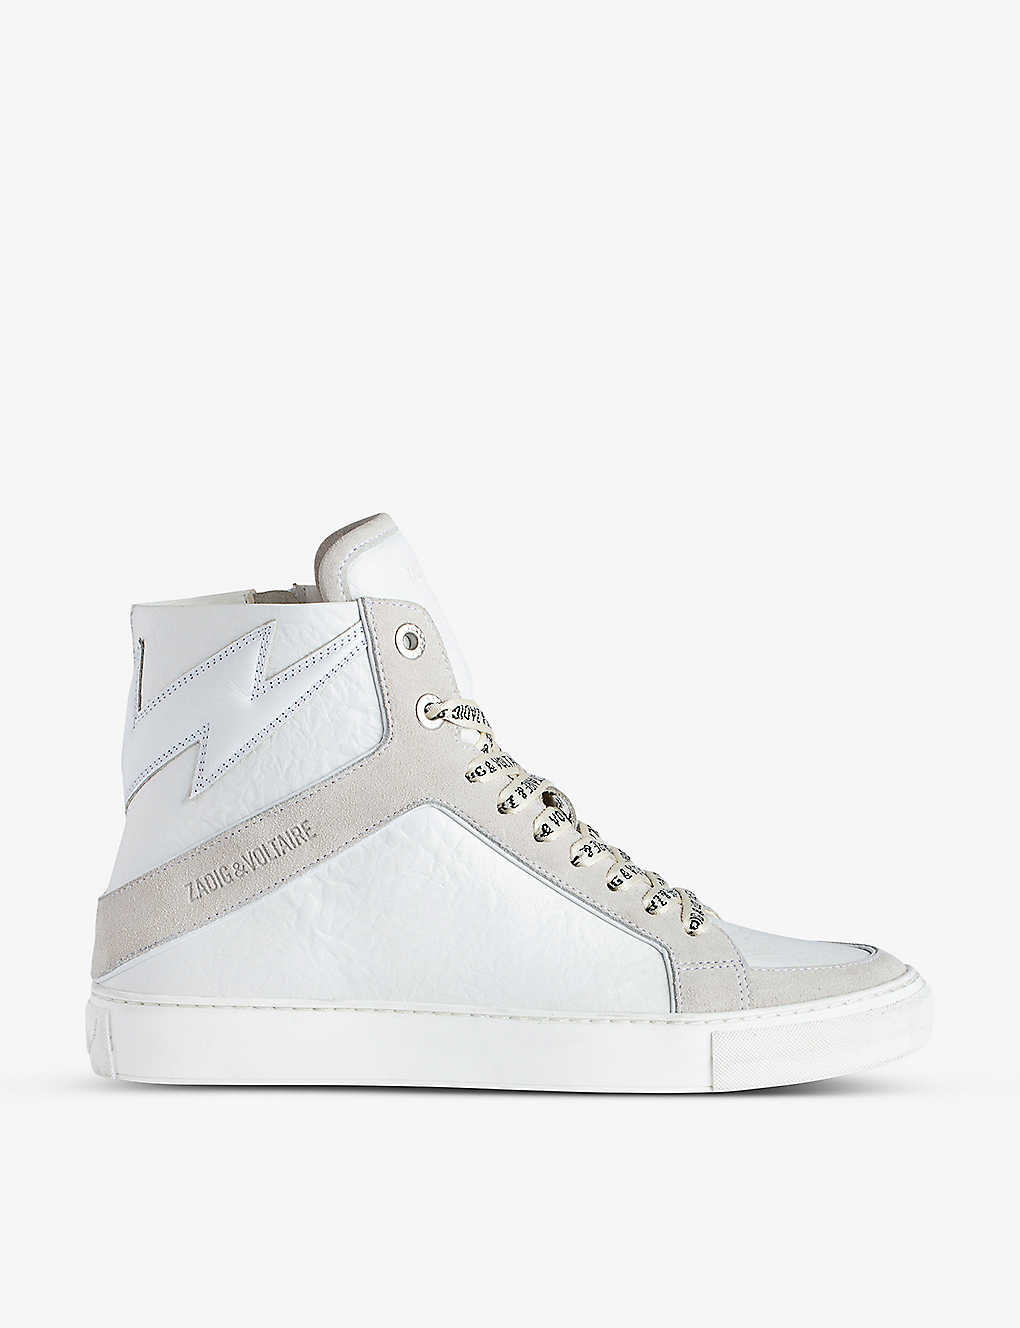 ZADIG & VOLTAIRE ZADIG&VOLTAIRE WOMENS BLANC HIGH FLASH CRINKLE-TEXTURE LEATHER HIGH-TOP TRAINERS